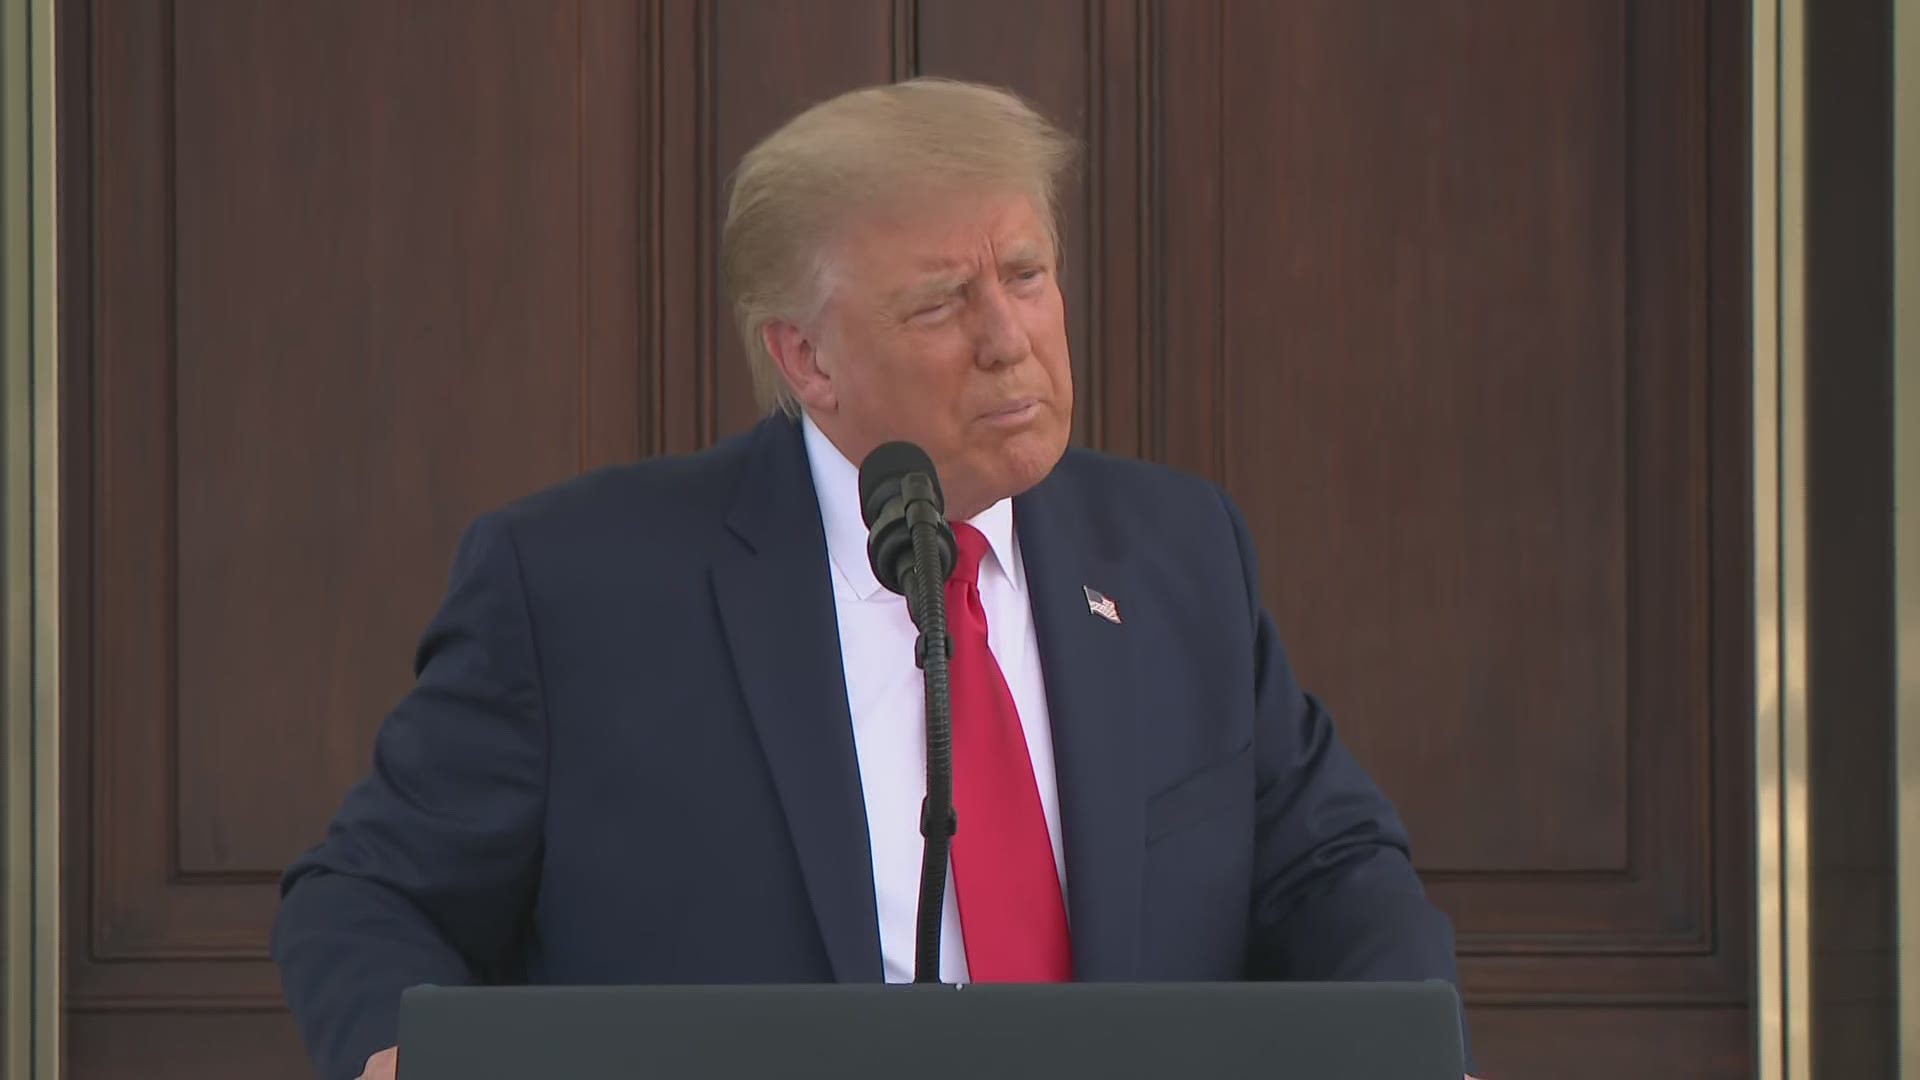 Trump says he's open to an investigation of Postmaster General DeJoy after some of DeJoy's former employees said they felt pressured to donate to GOP candidates.